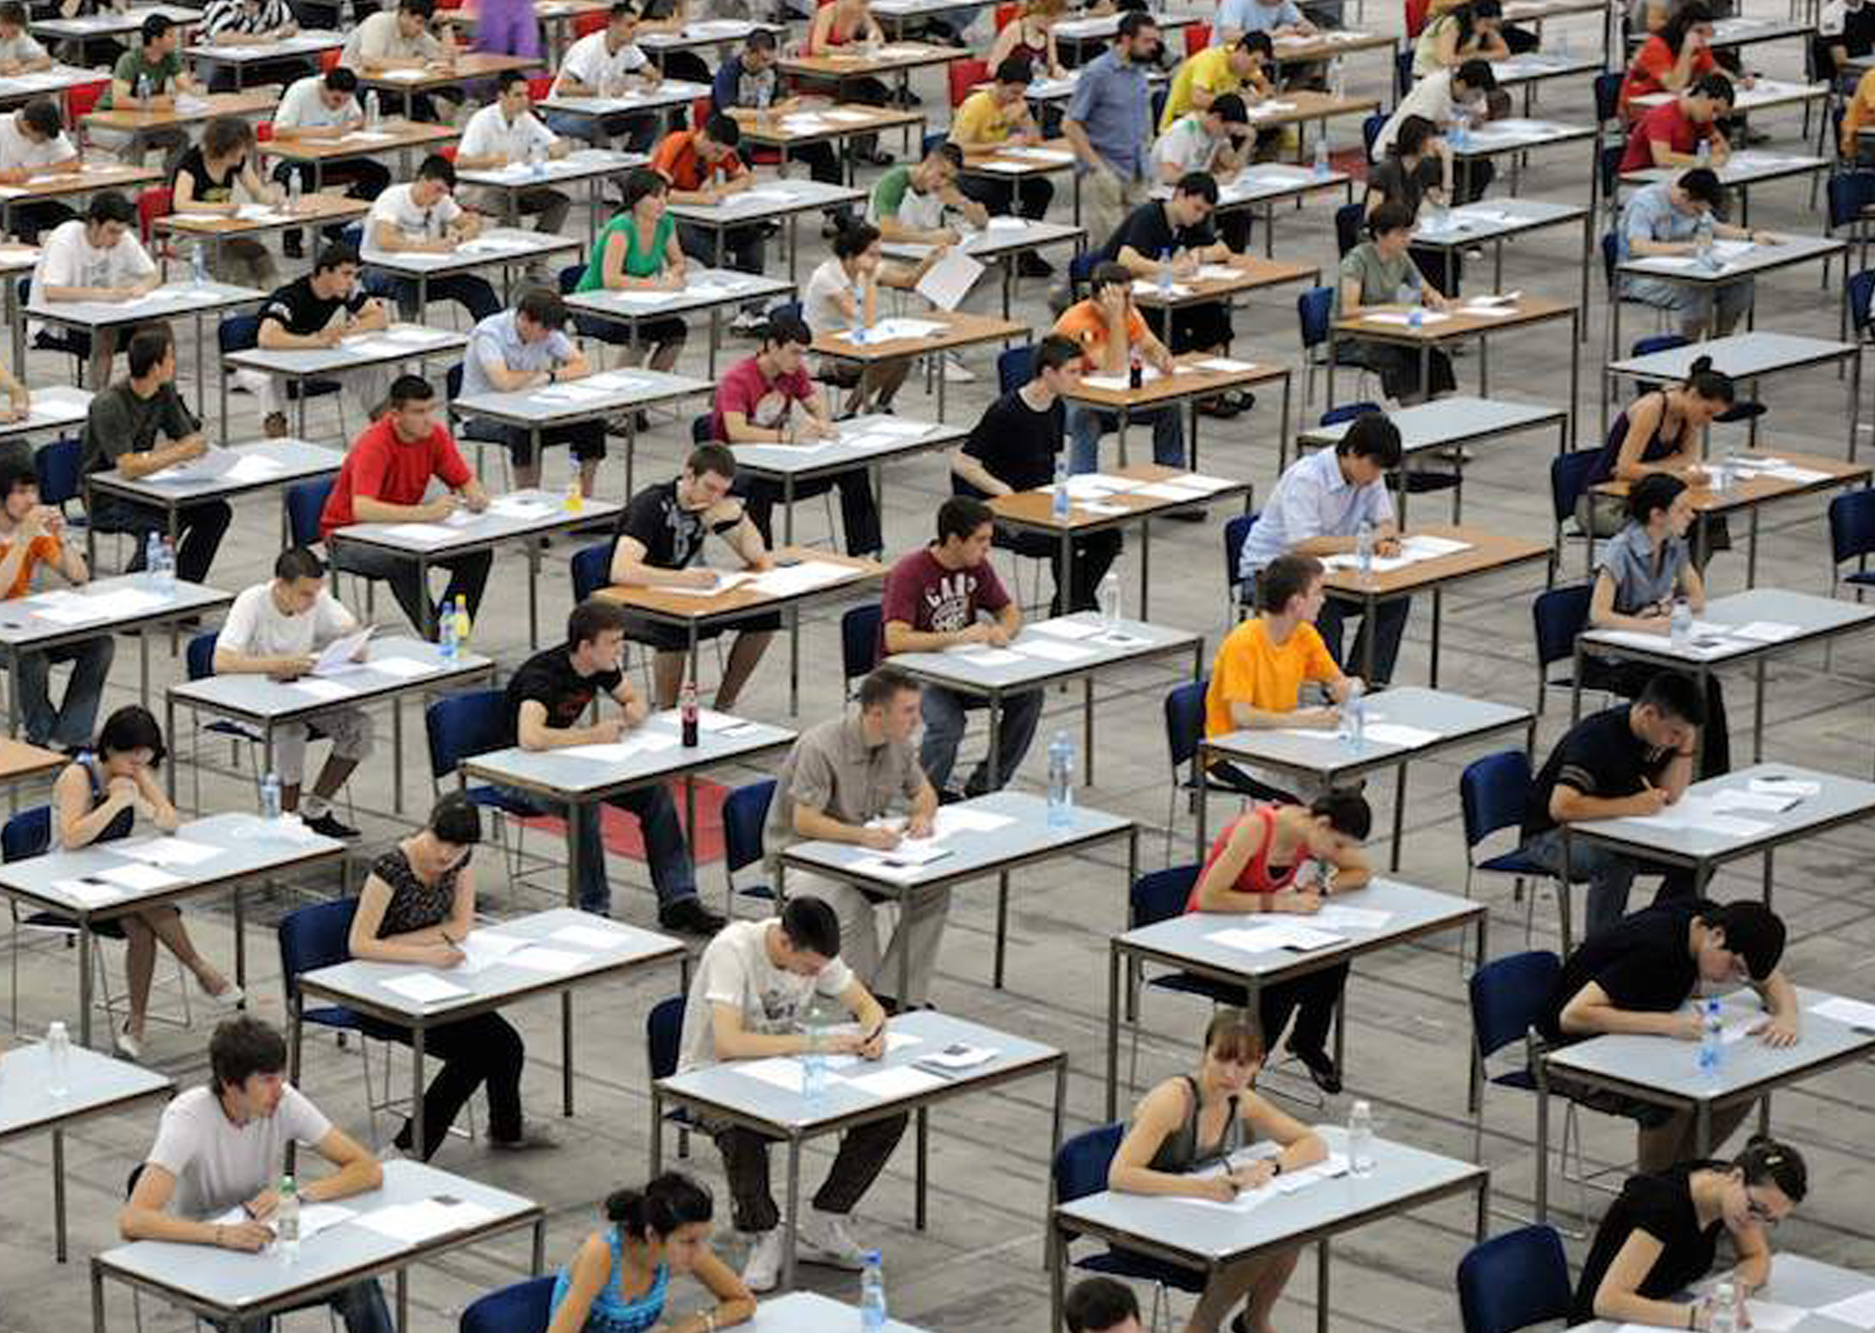 College4Careers College Counseling 10th Grade Sophomore High School photo of students taking college entrance exams image 2